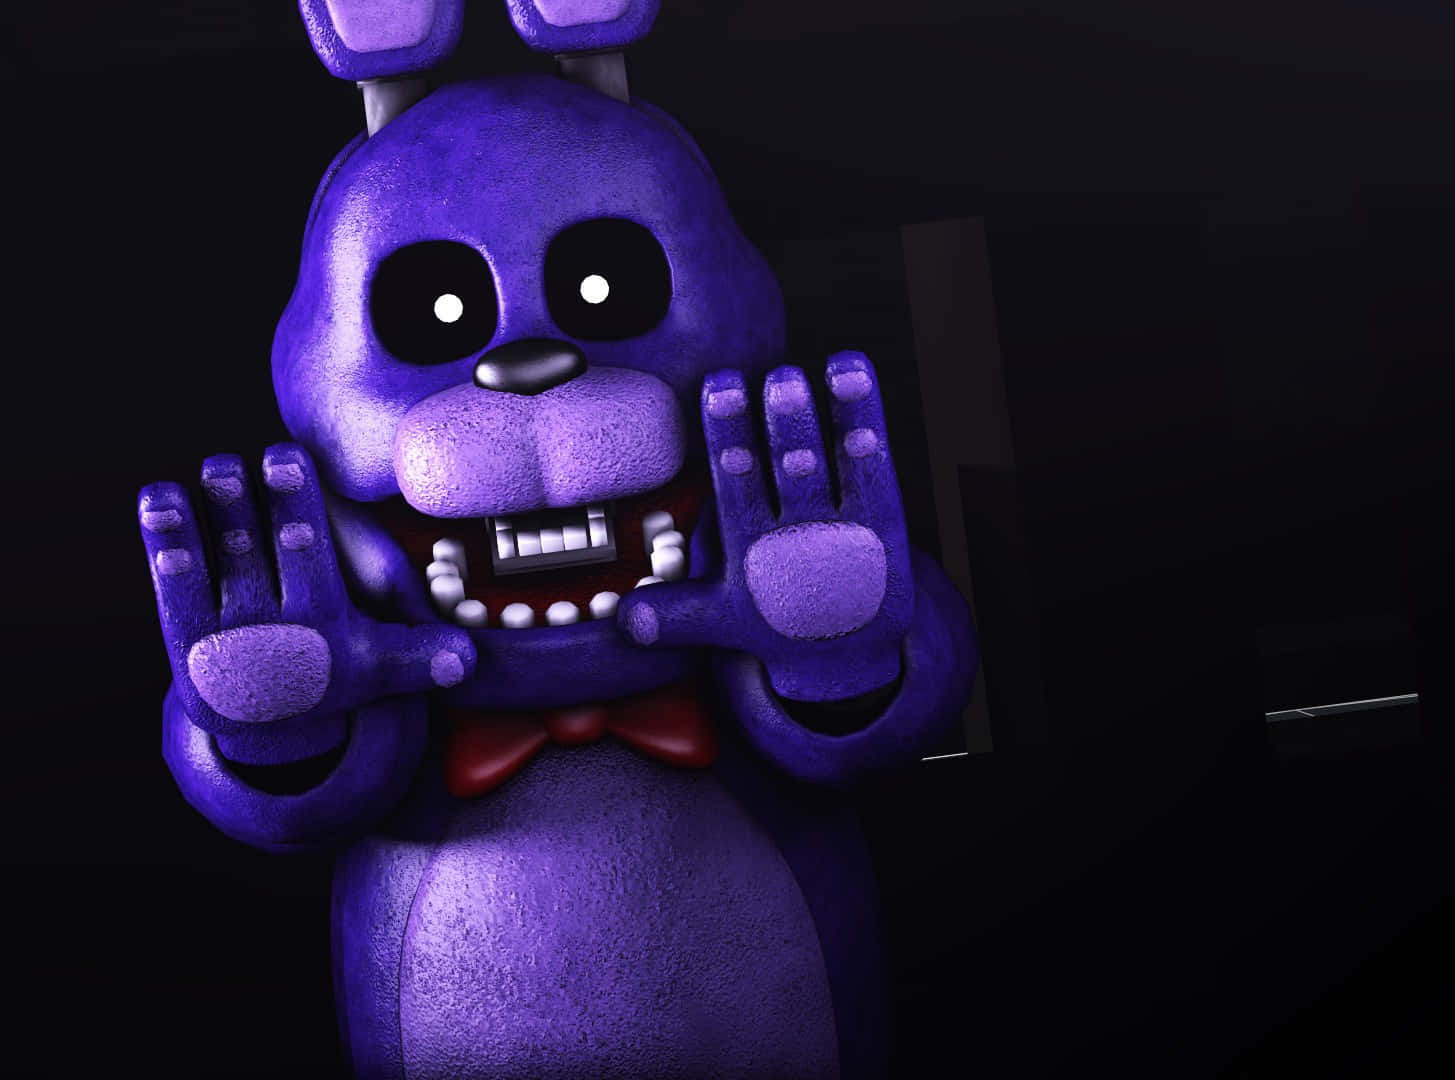 Bonnie the Bunny in all his glory Wallpaper